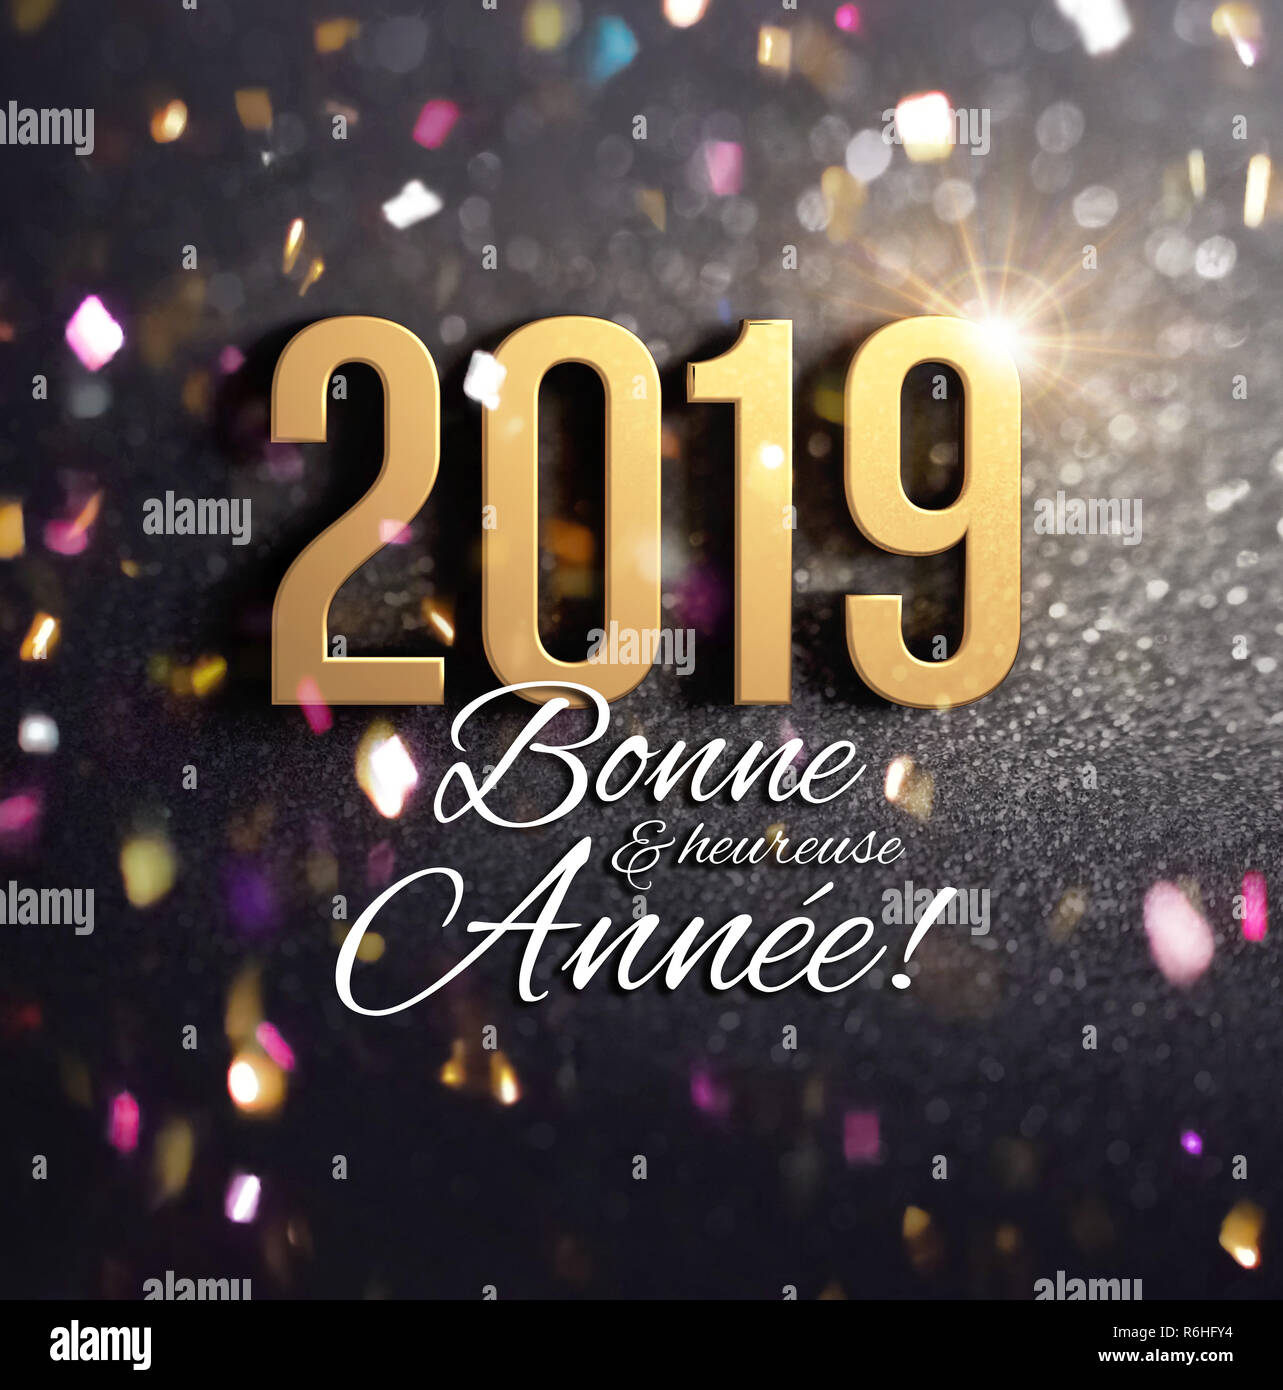 Happy New Year 2019 date number colored in gold, greetings in French language, on a festive black background with glitters and confetti - 3D illustrat Stock Photo